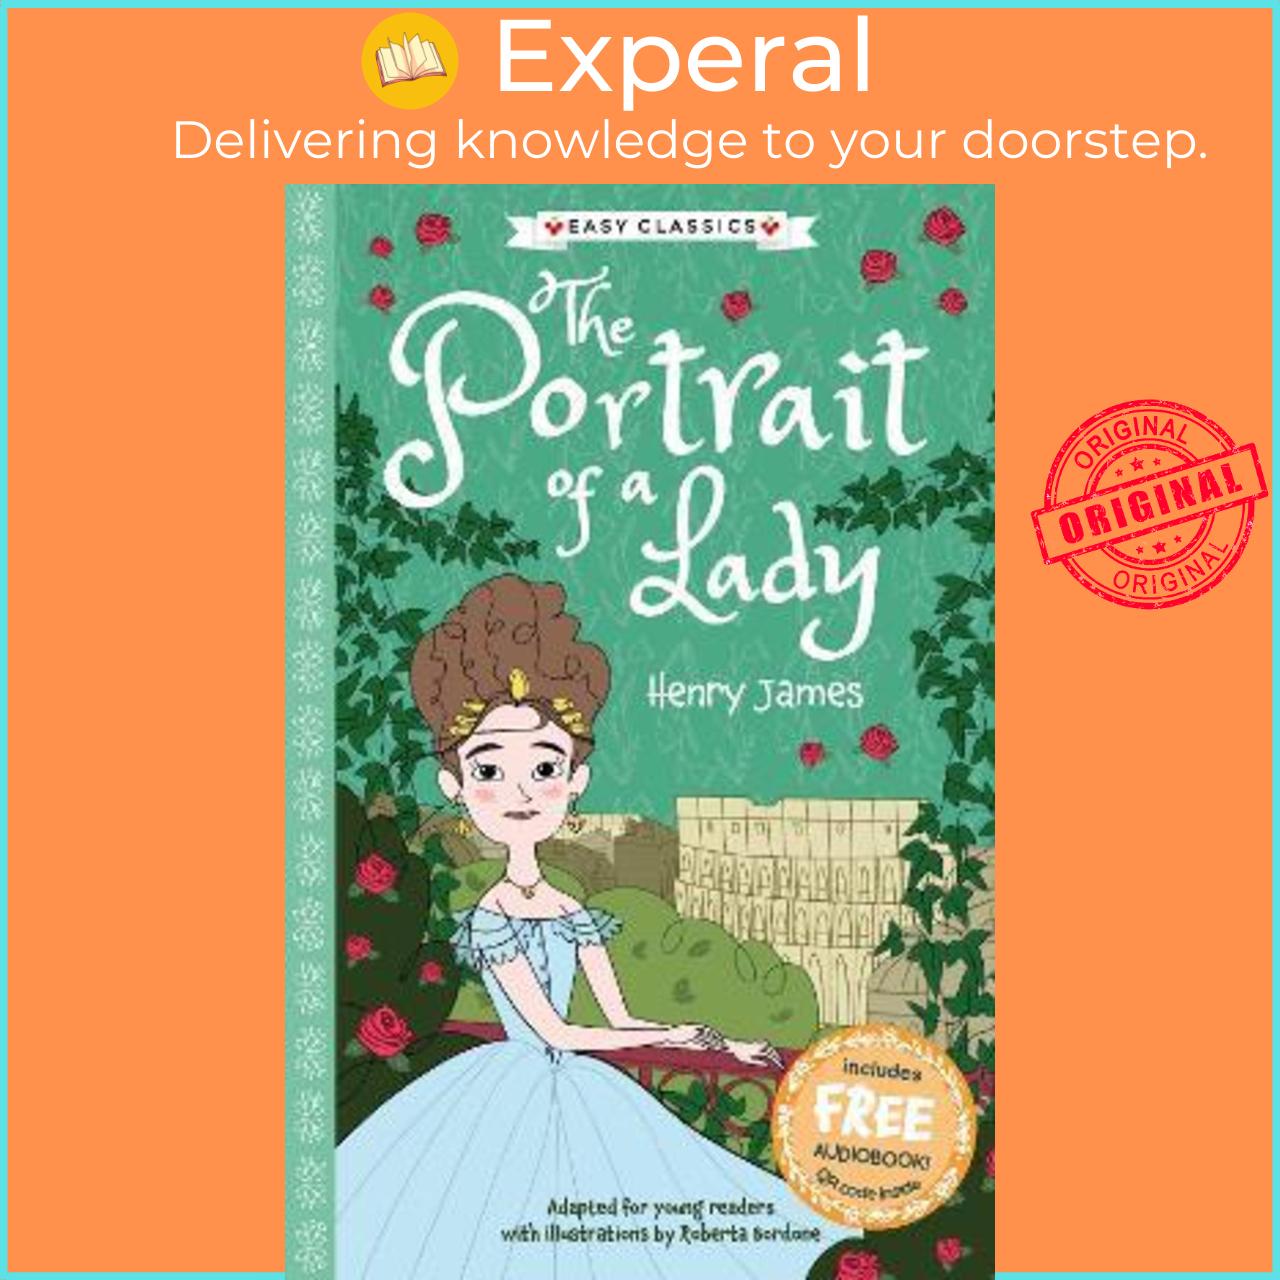 Sách - The Portrait of a Lady (Easy Classics) by Gemma Barder (UK edition, paperback)